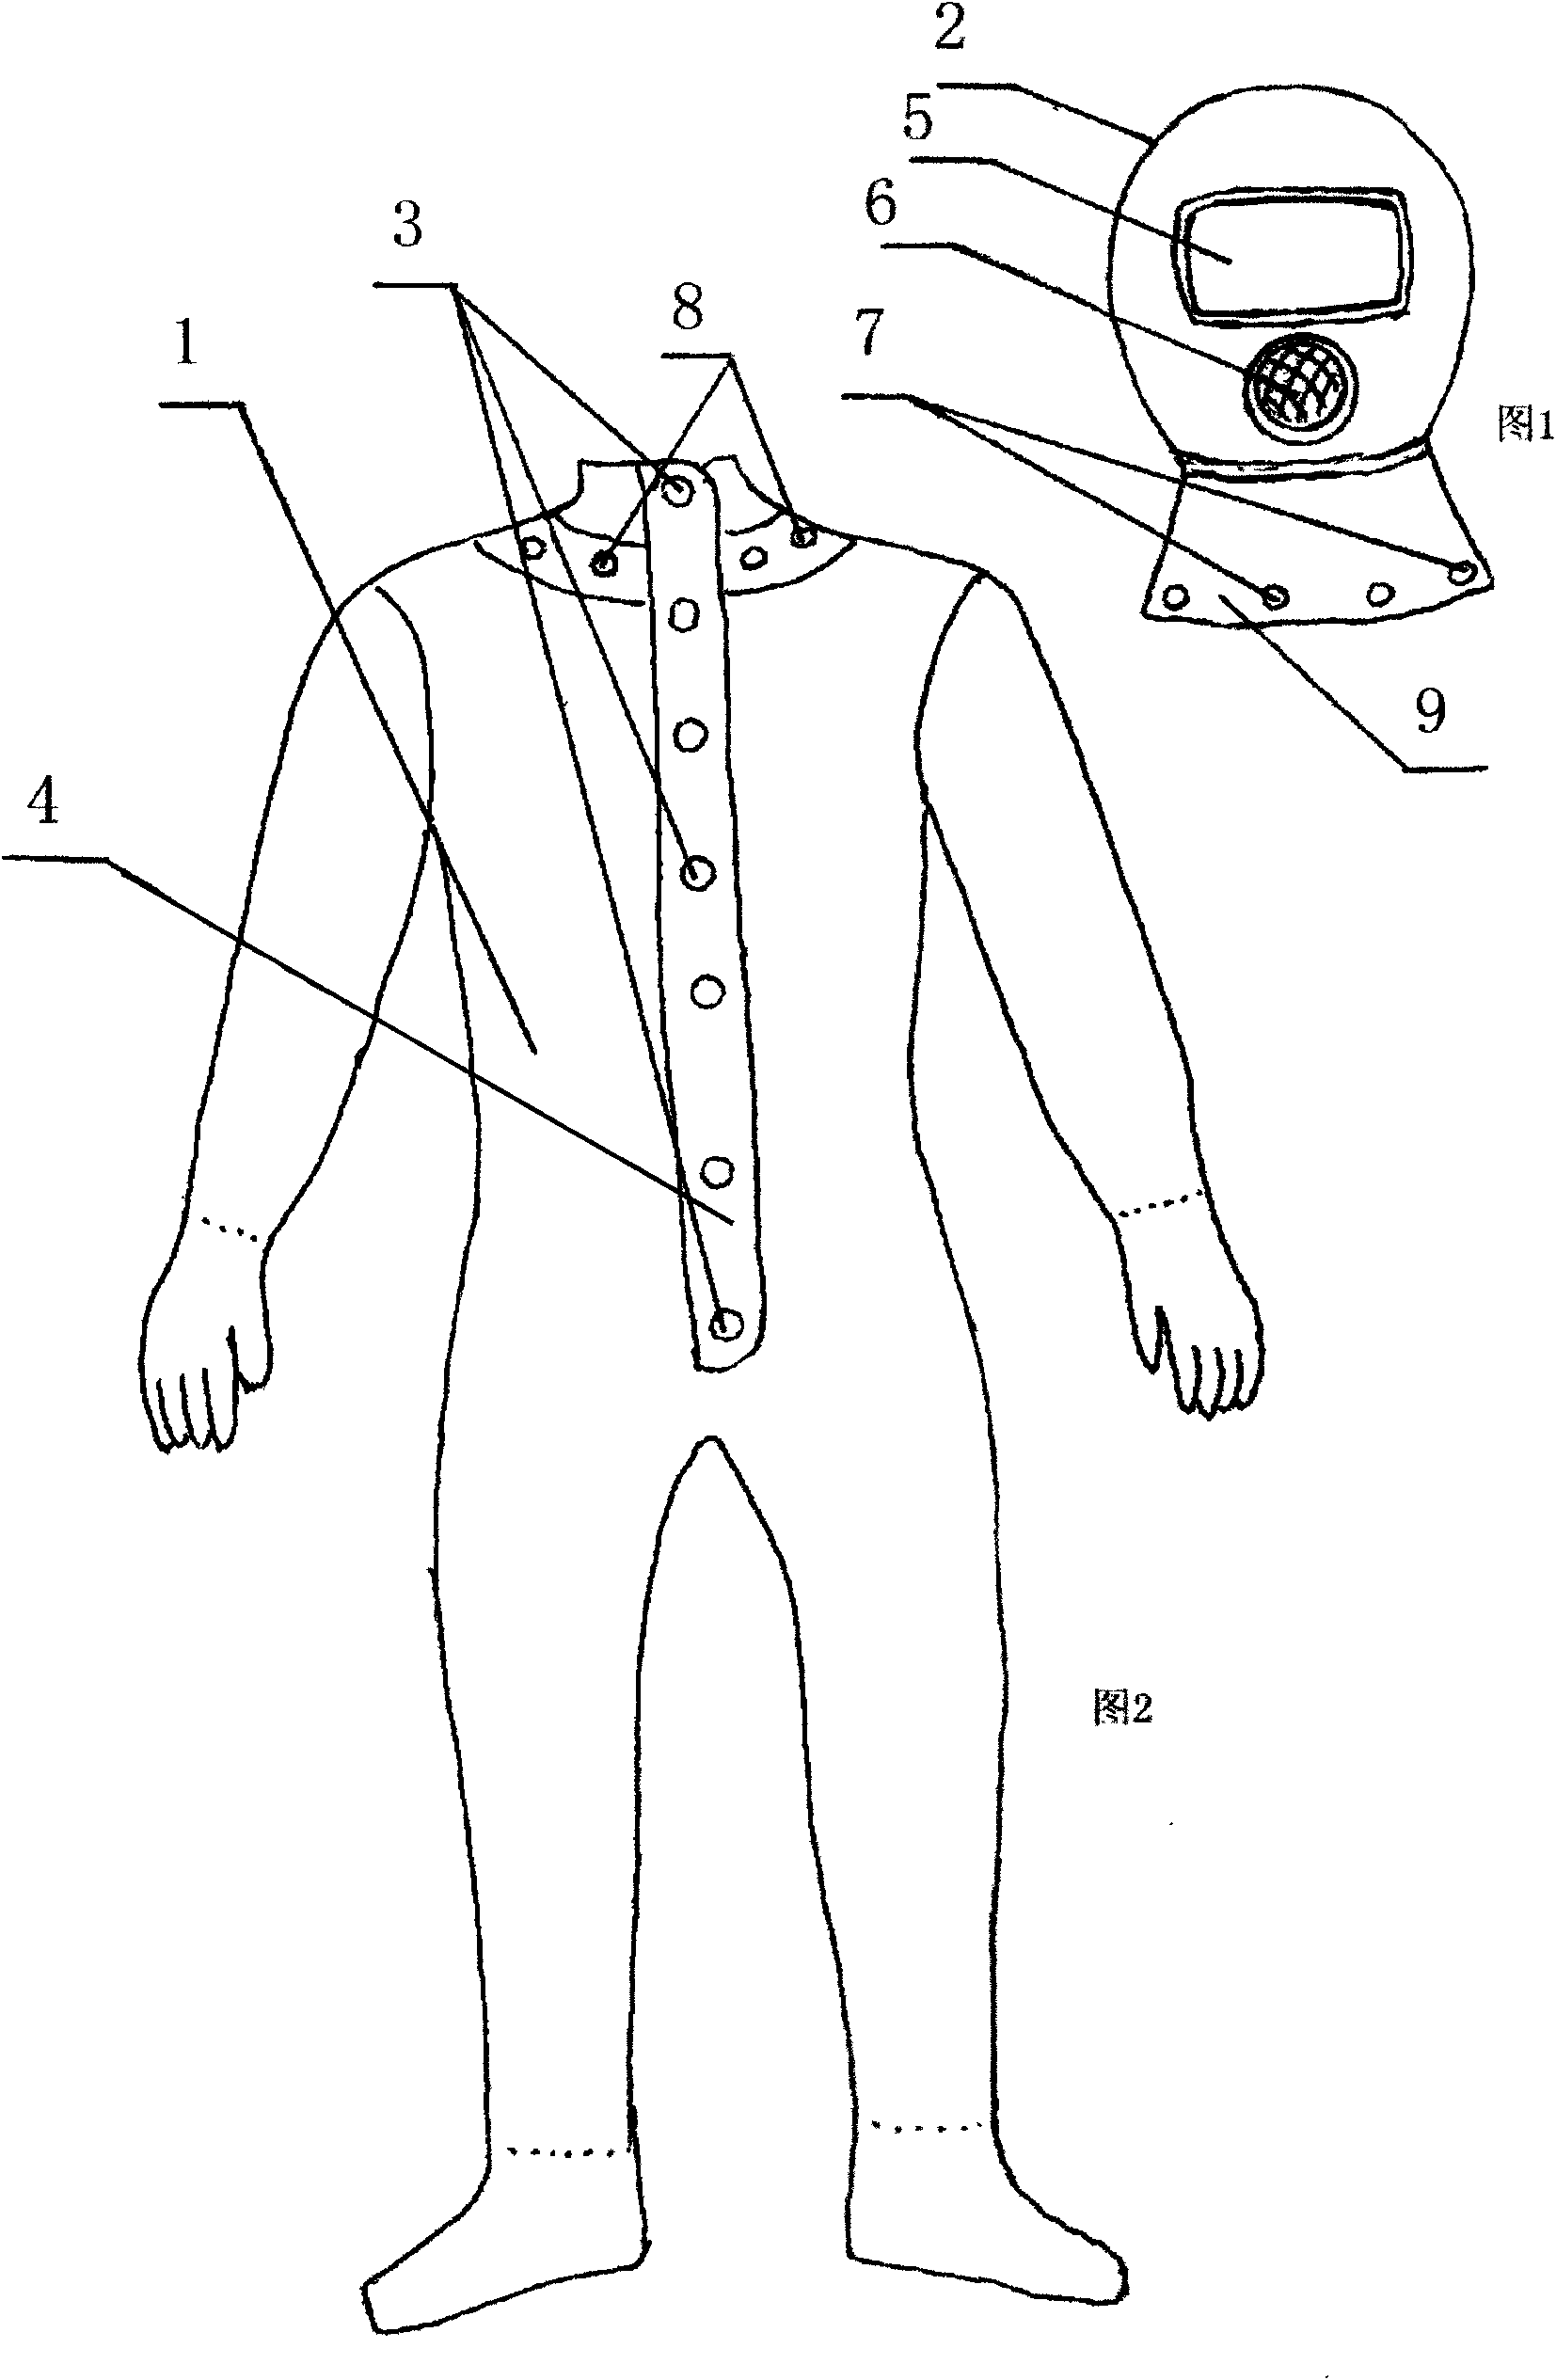 Escaping suit for preventing smoke, retarding flame and preventing fire and manufacture method thereof